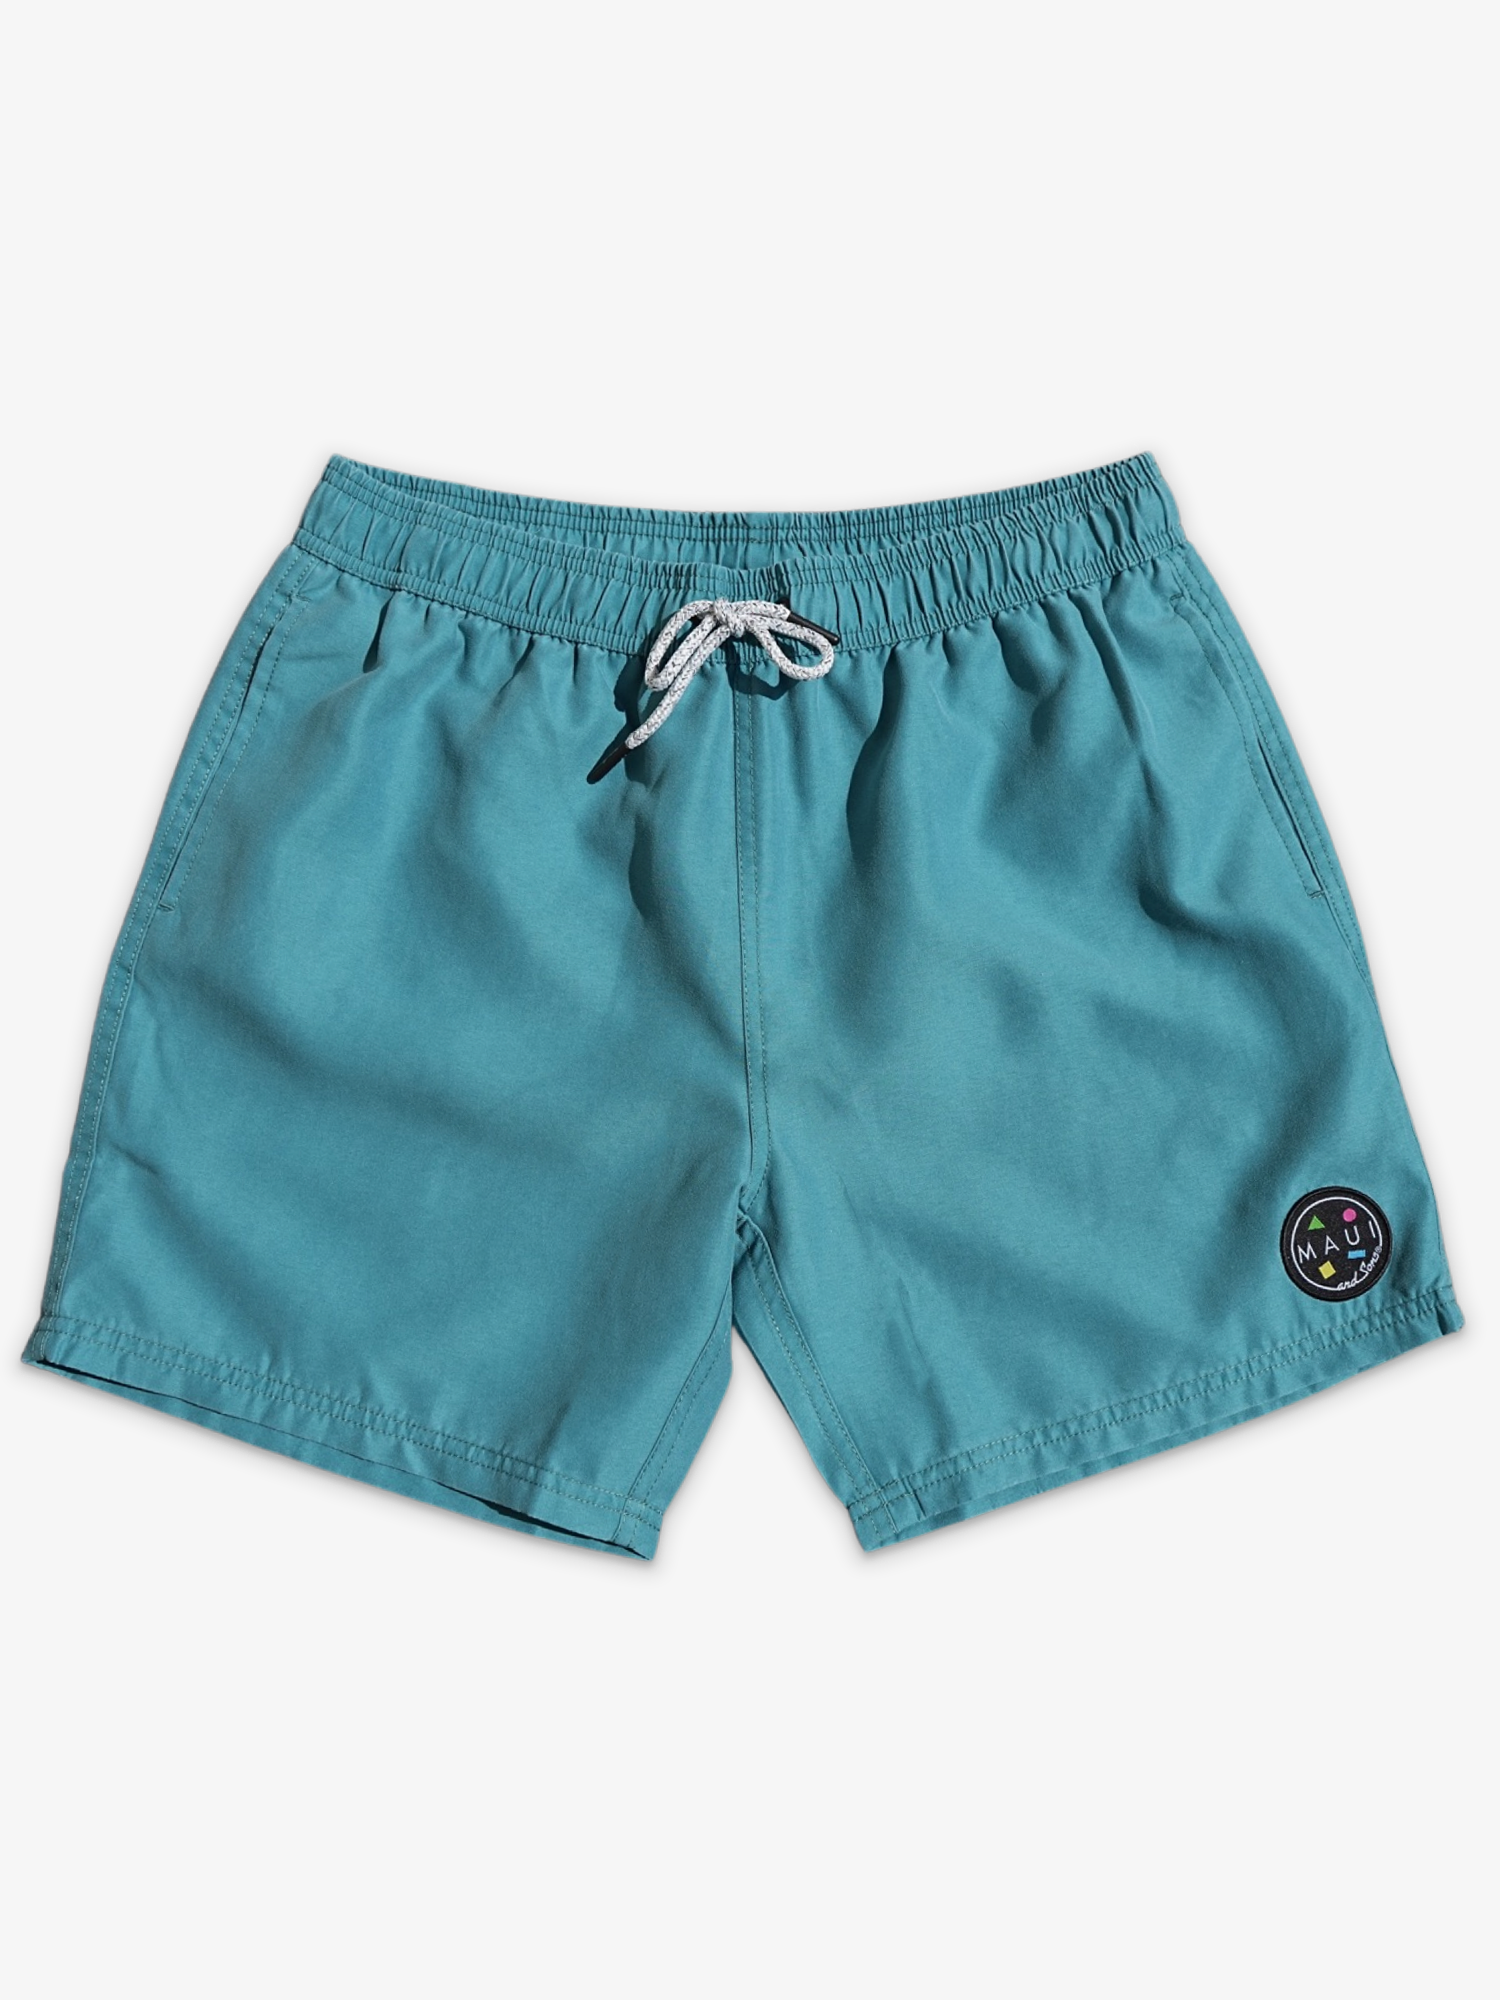 Party On Pool Shorts